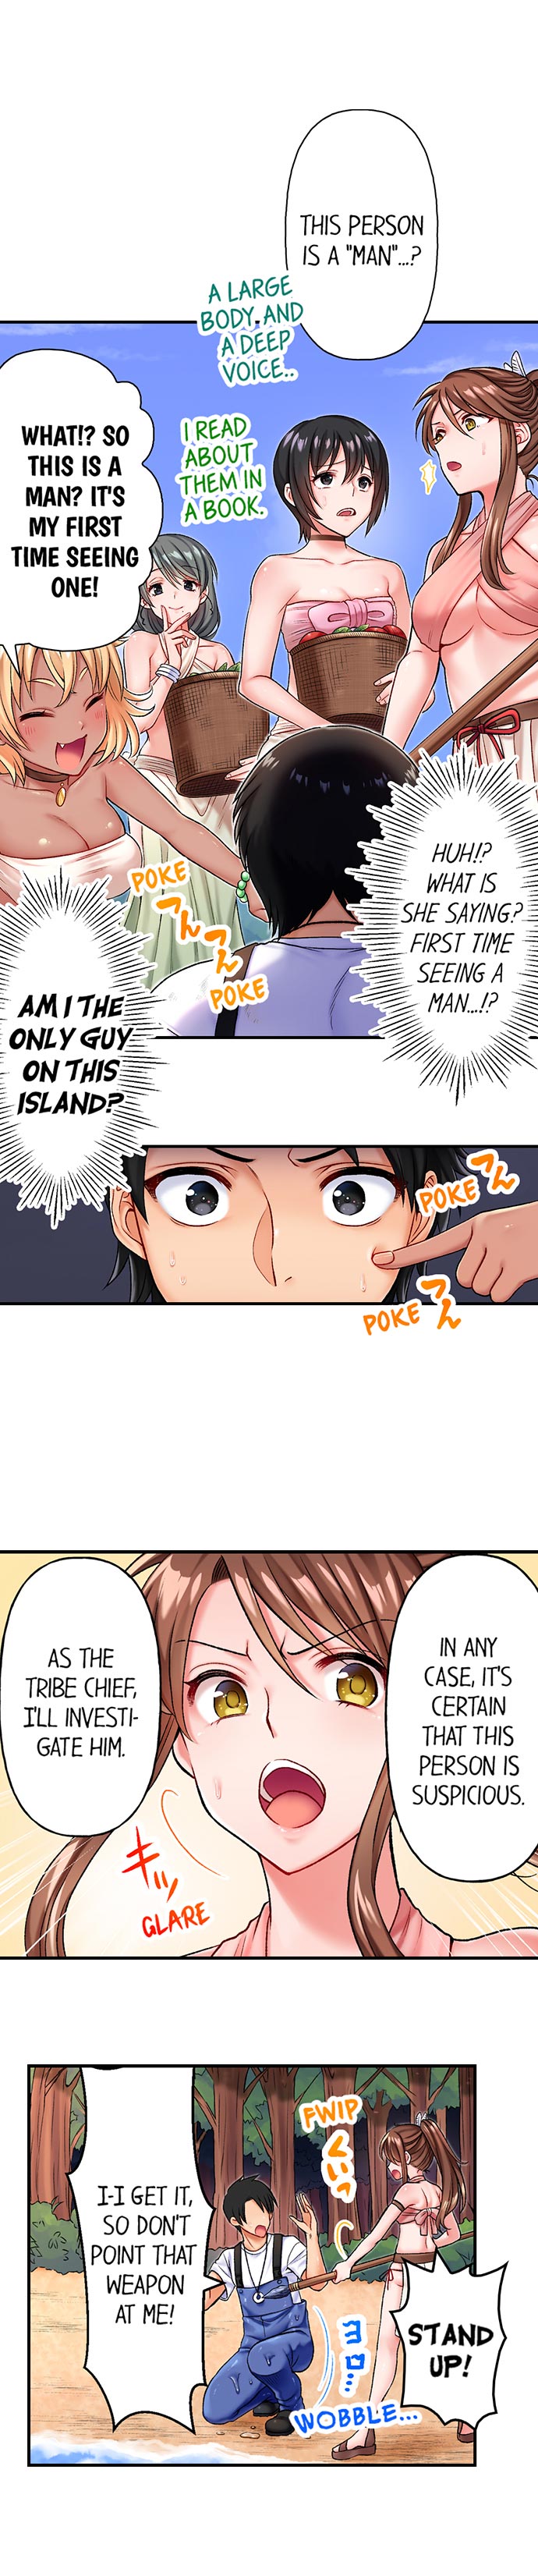 Girls' Island: Only I Can Fuck Them All! - Chapter 1 Page 6